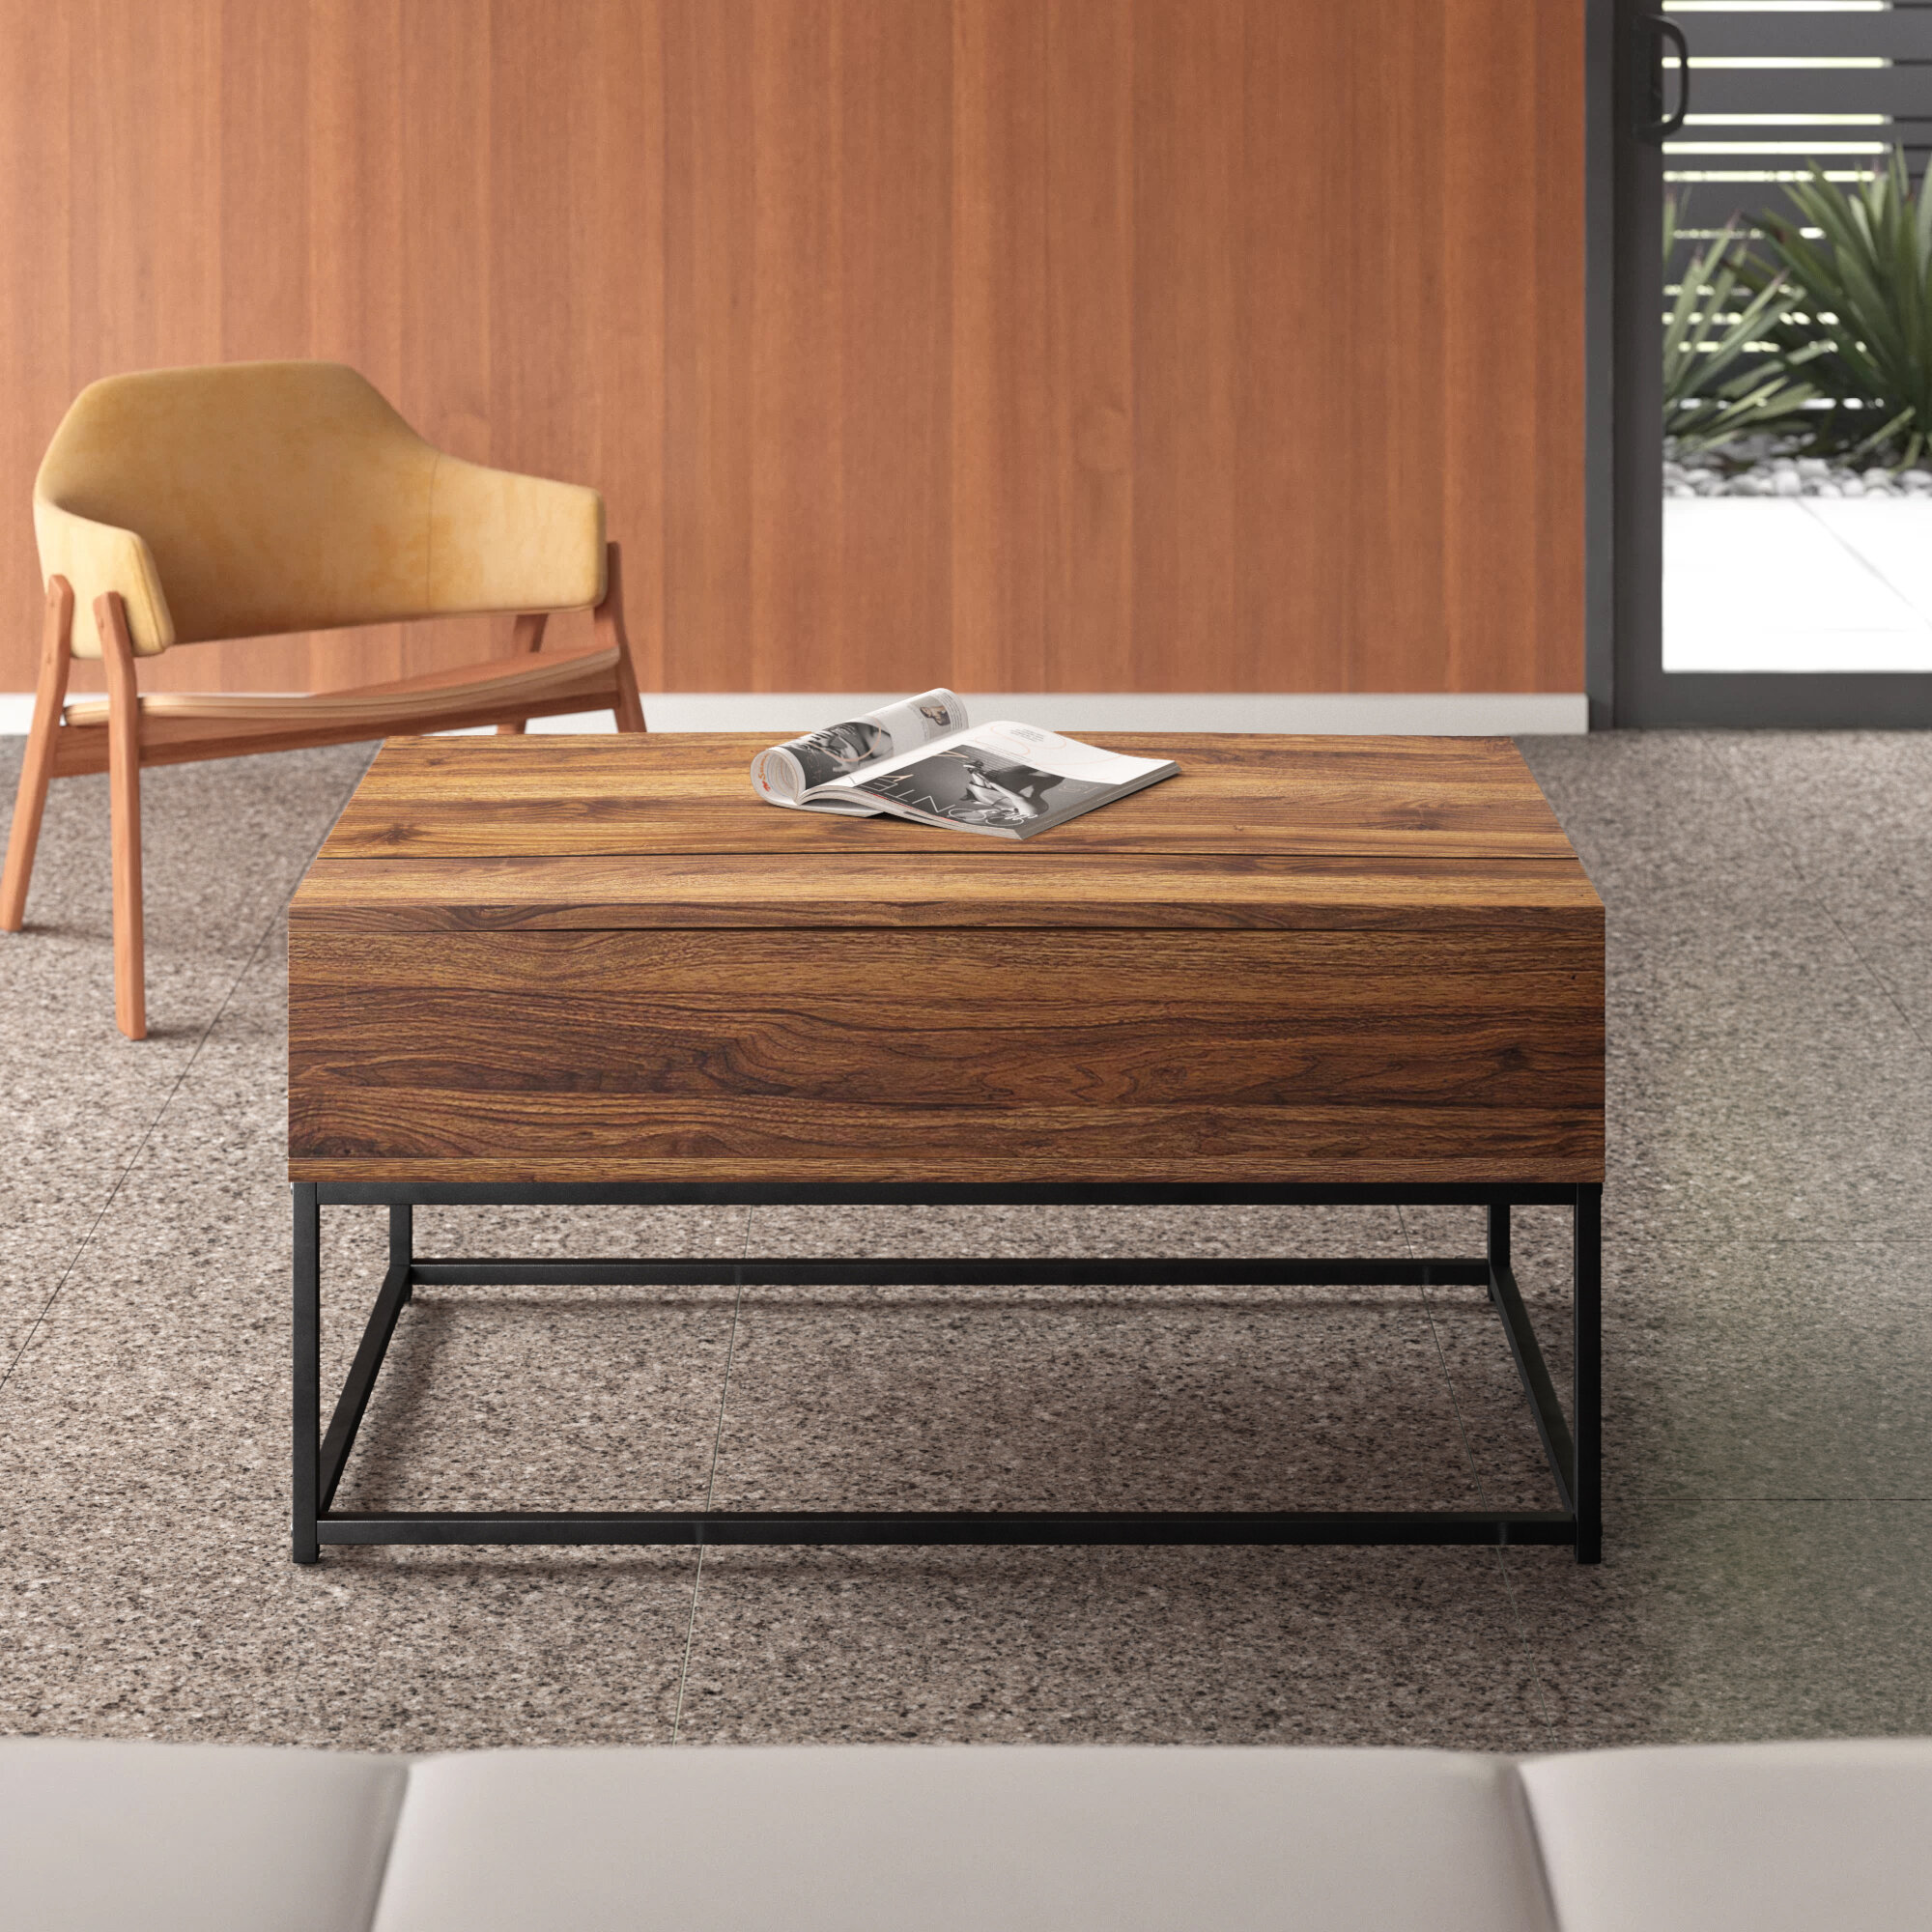 Dark Walnut 4 Coffee Table for Living Room Lift Top Coffee Table With Storage Wood & Metal Frame Living Room Furniture Table 